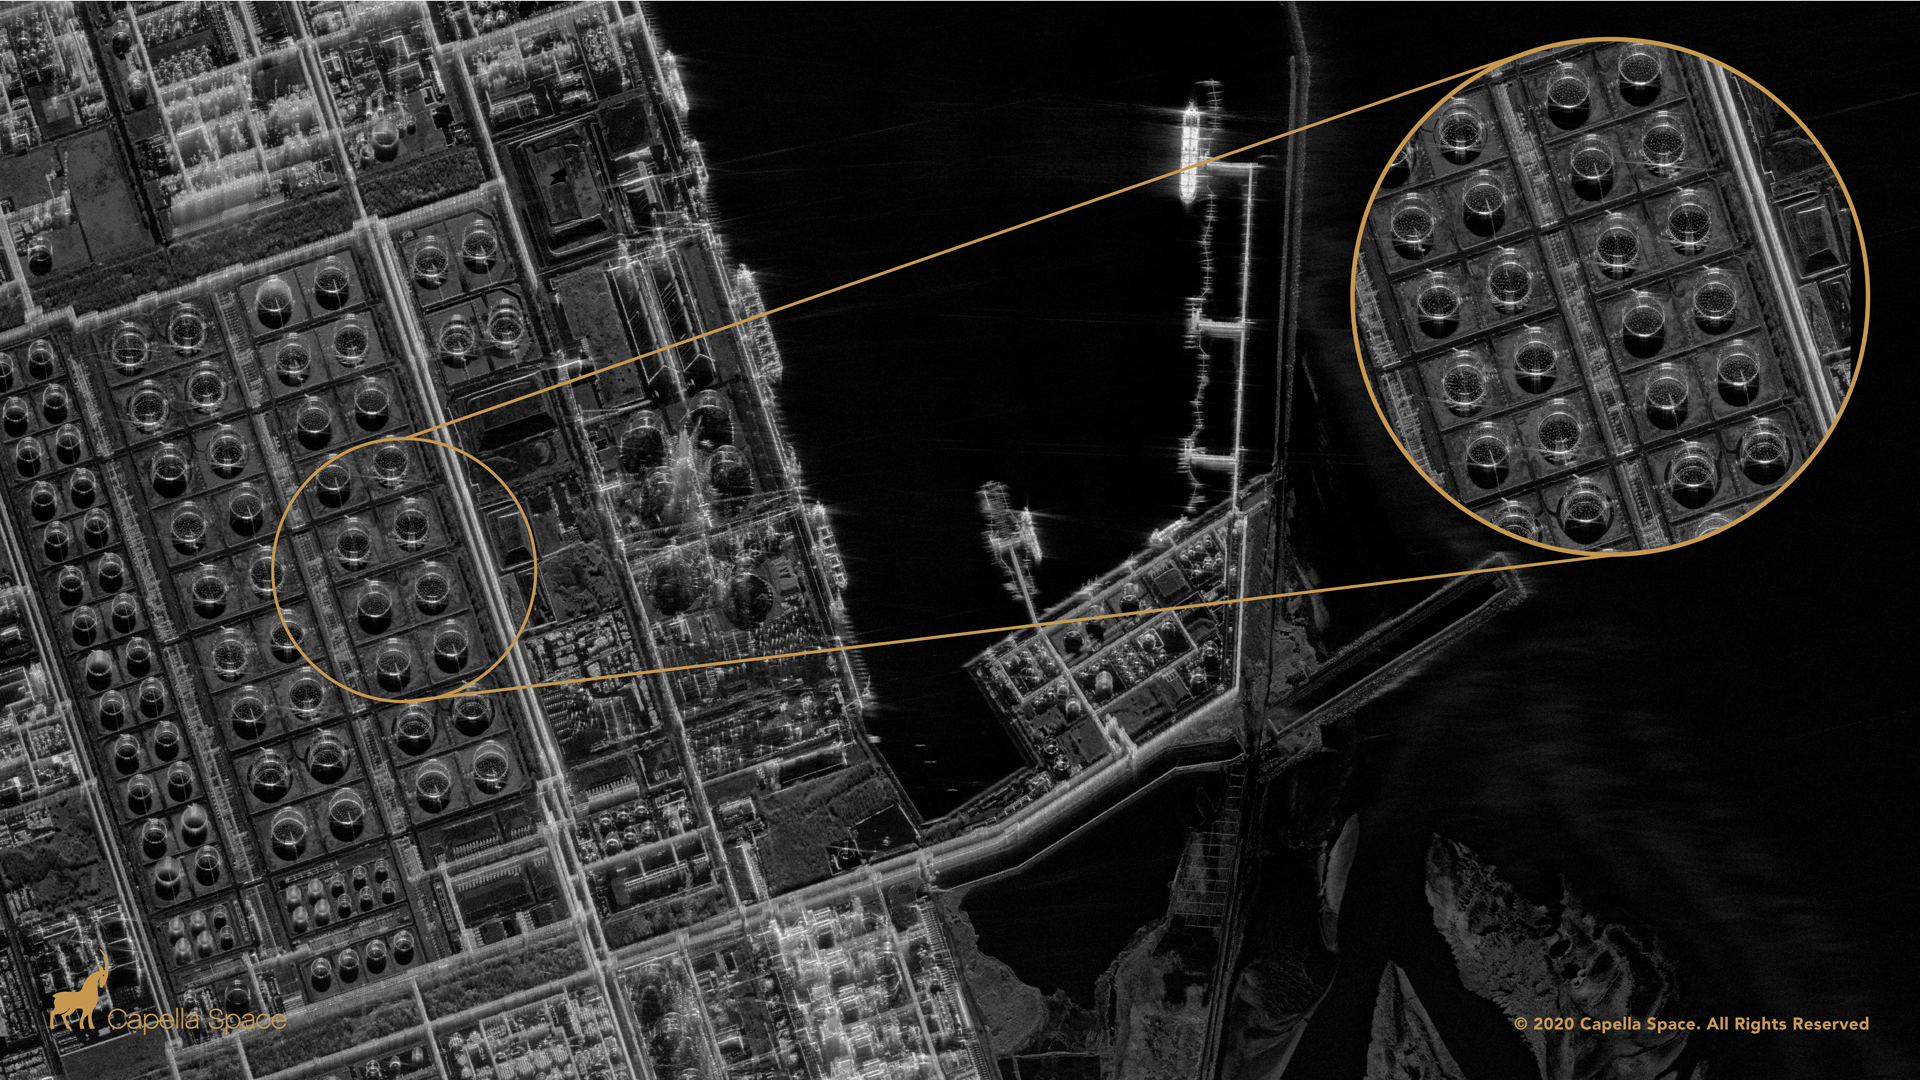 Mailiao Oil Refinery, Taiwan: Once again, experts can use such imagery to calculate oil storage